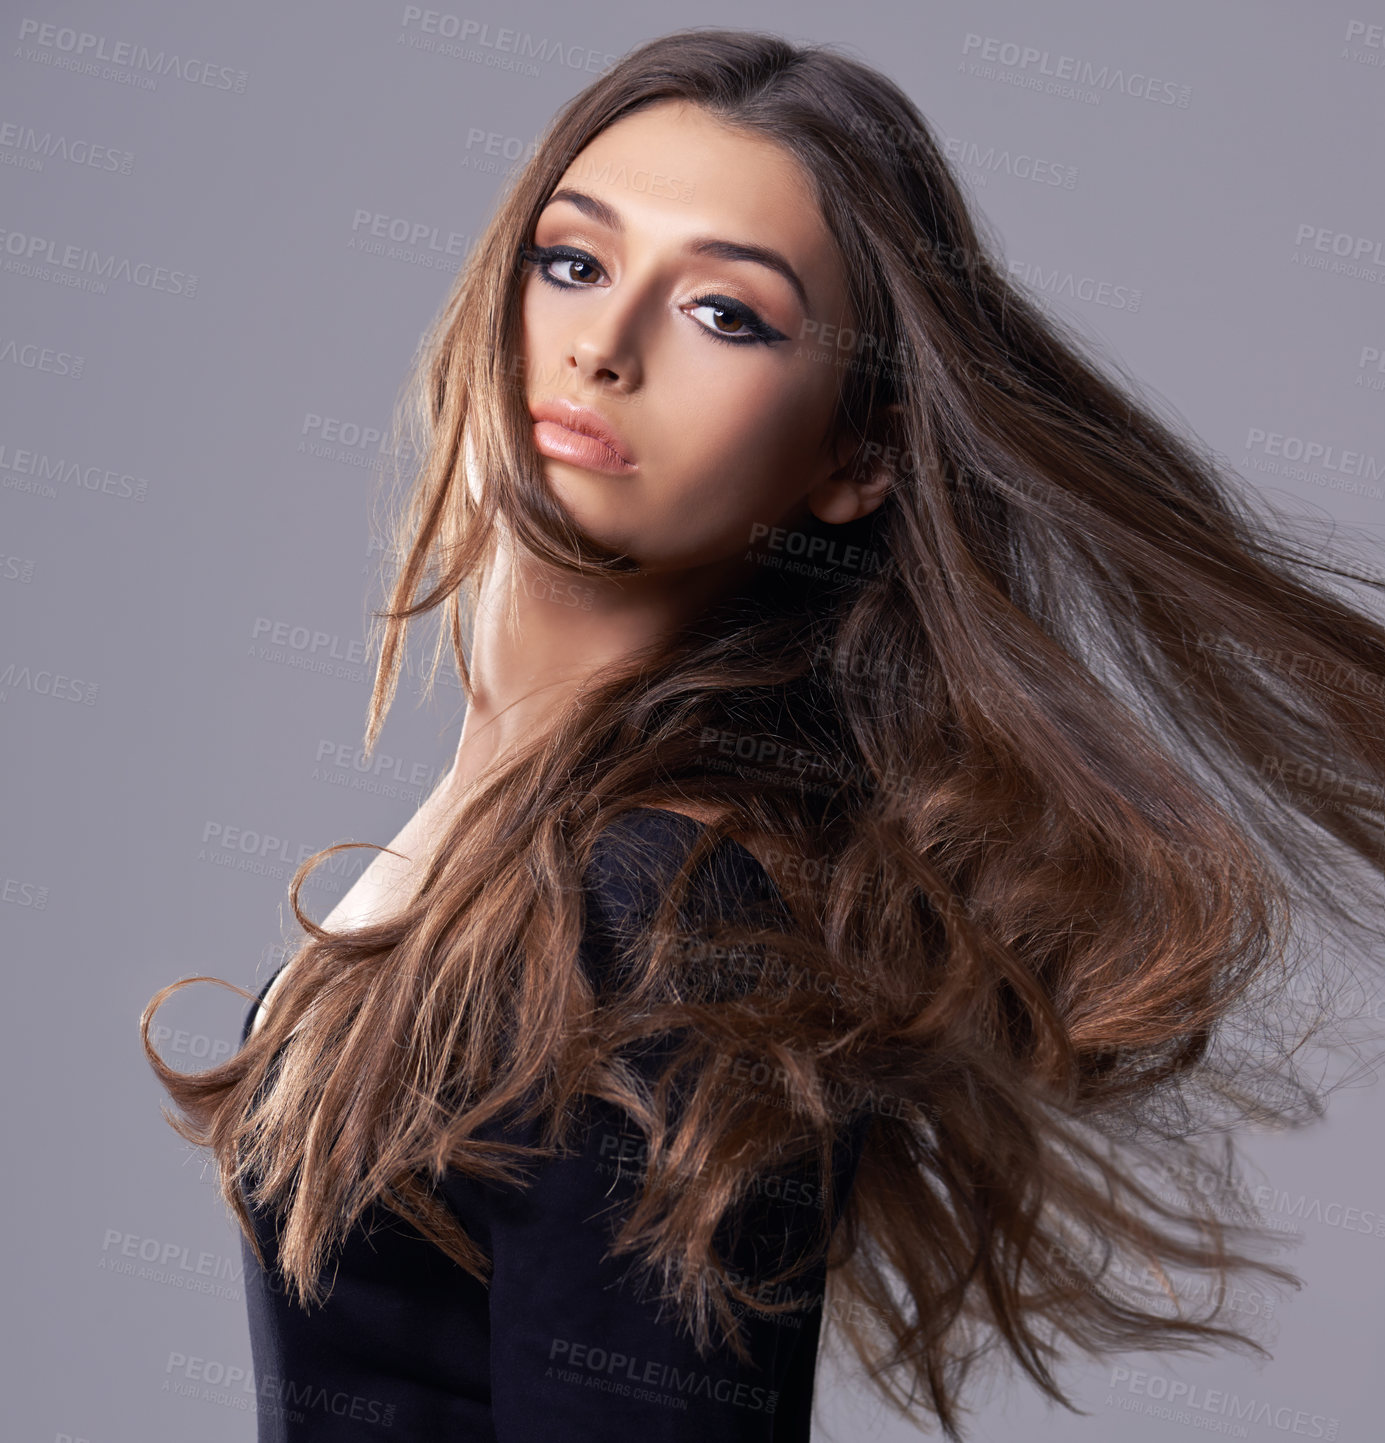 Buy stock photo Studio portrait of a gorgeous young woman against a gray background